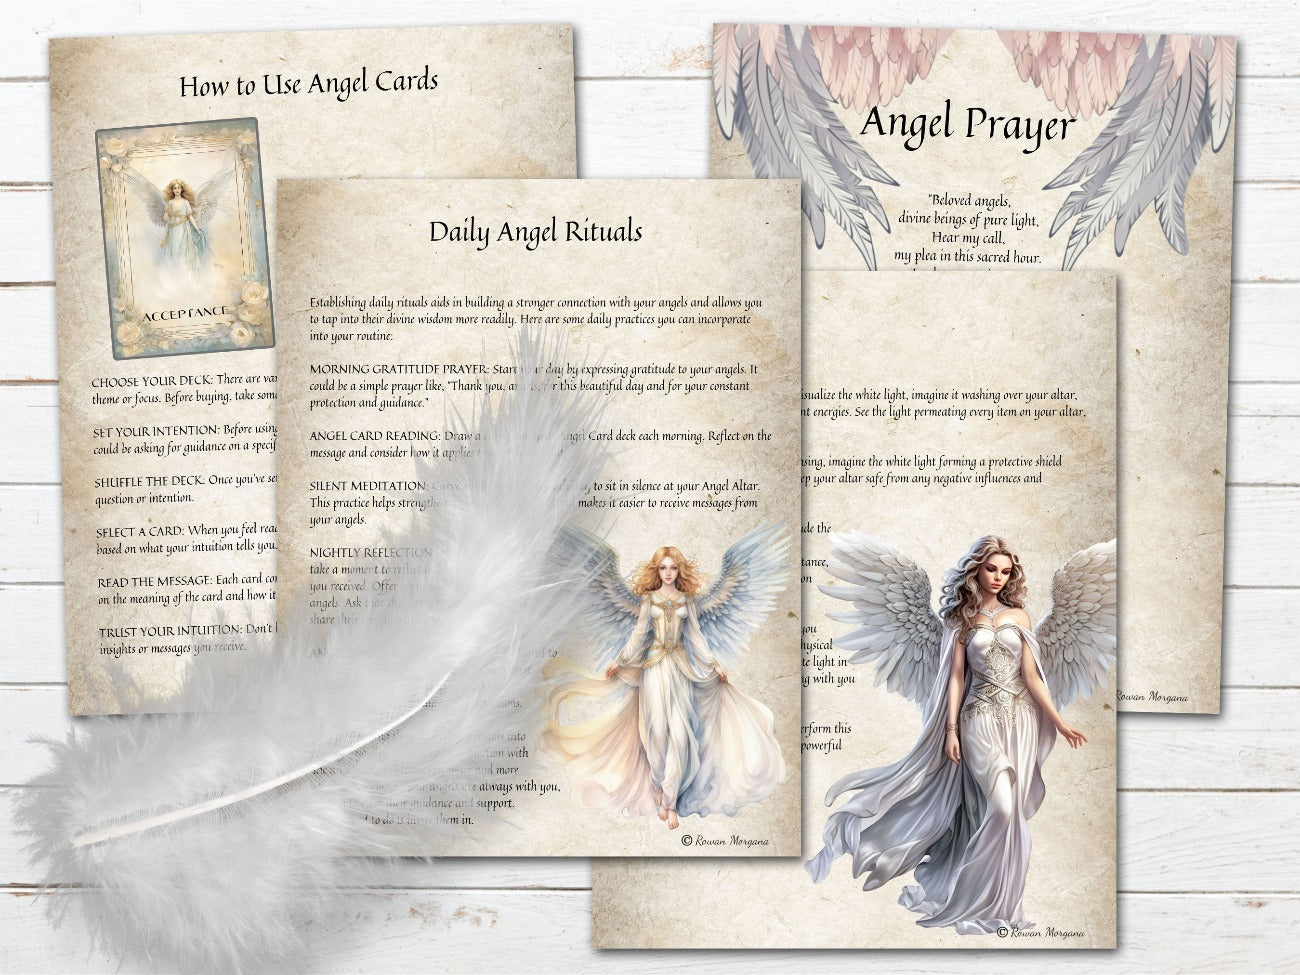 ANGEL GUIDANCE pages, Essential Guide to Divine Angelic Realm, Daily Angel Rituals, How to Use Angel Cards, Angel Prayer - Morgana Magick Spell